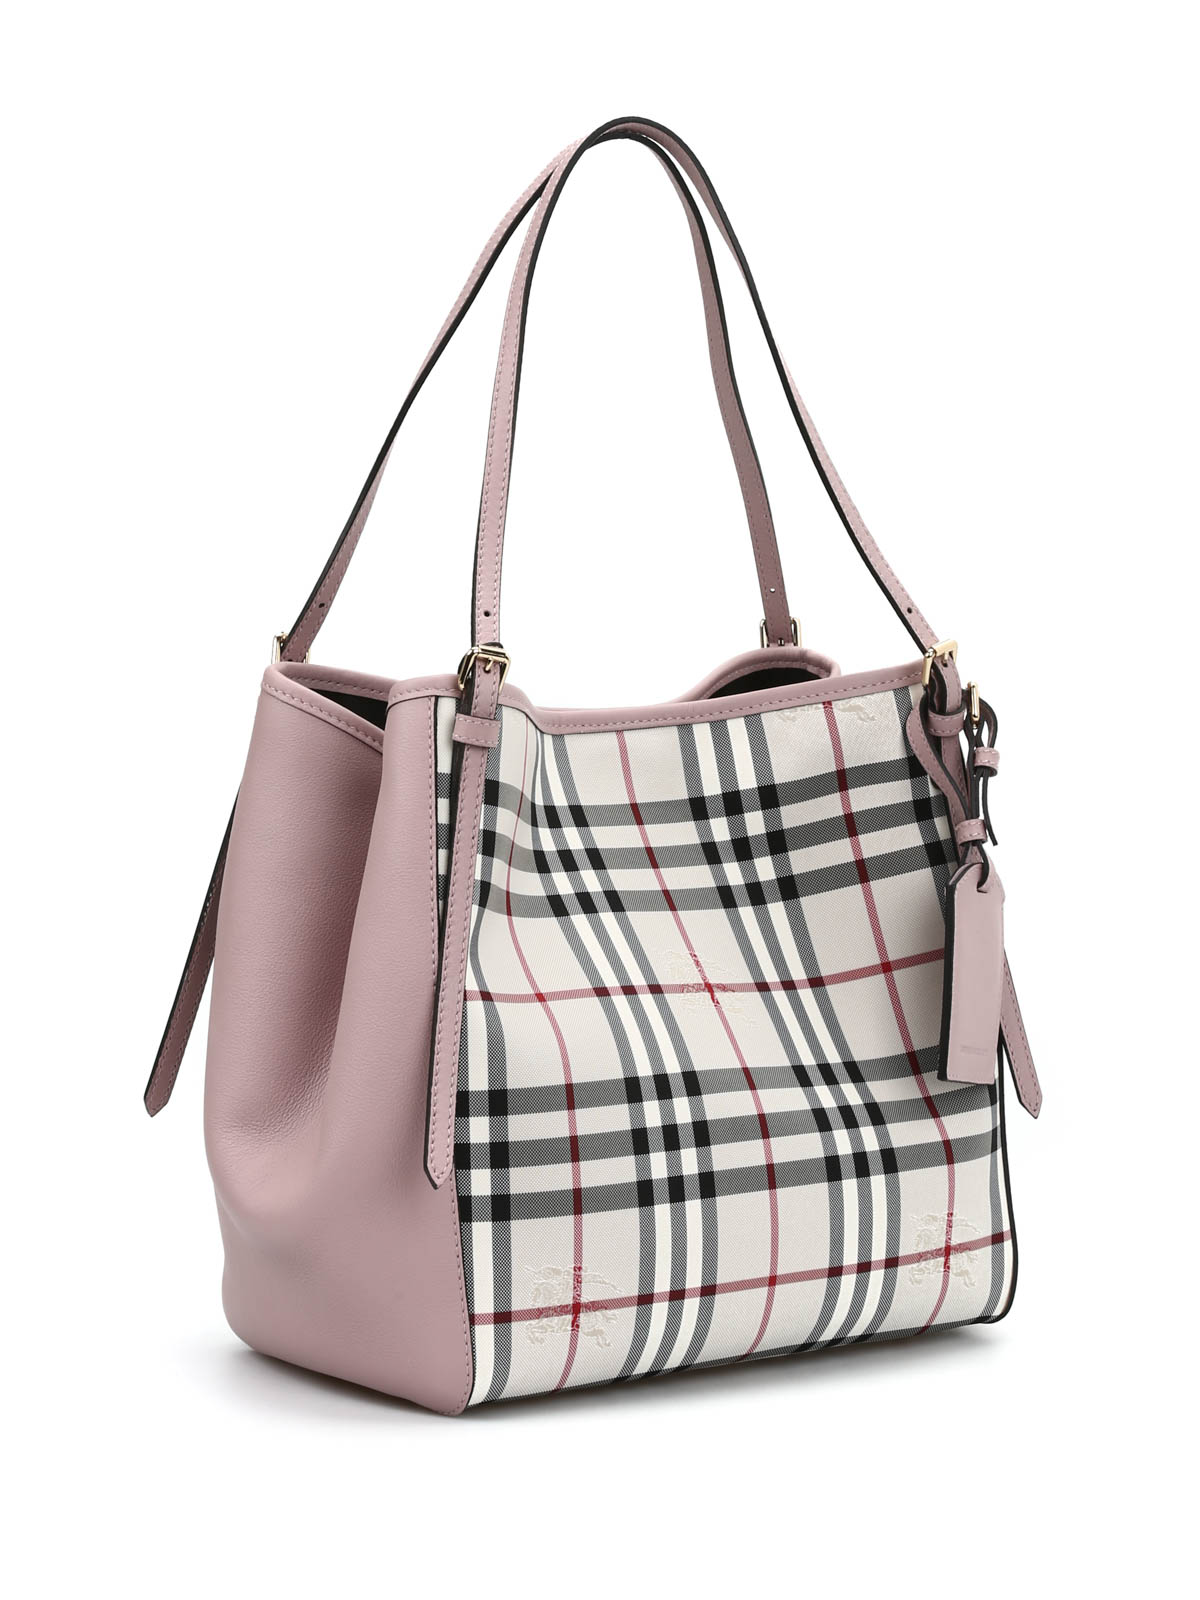 Totes bags Burberry - Small Canter tote - 4003438